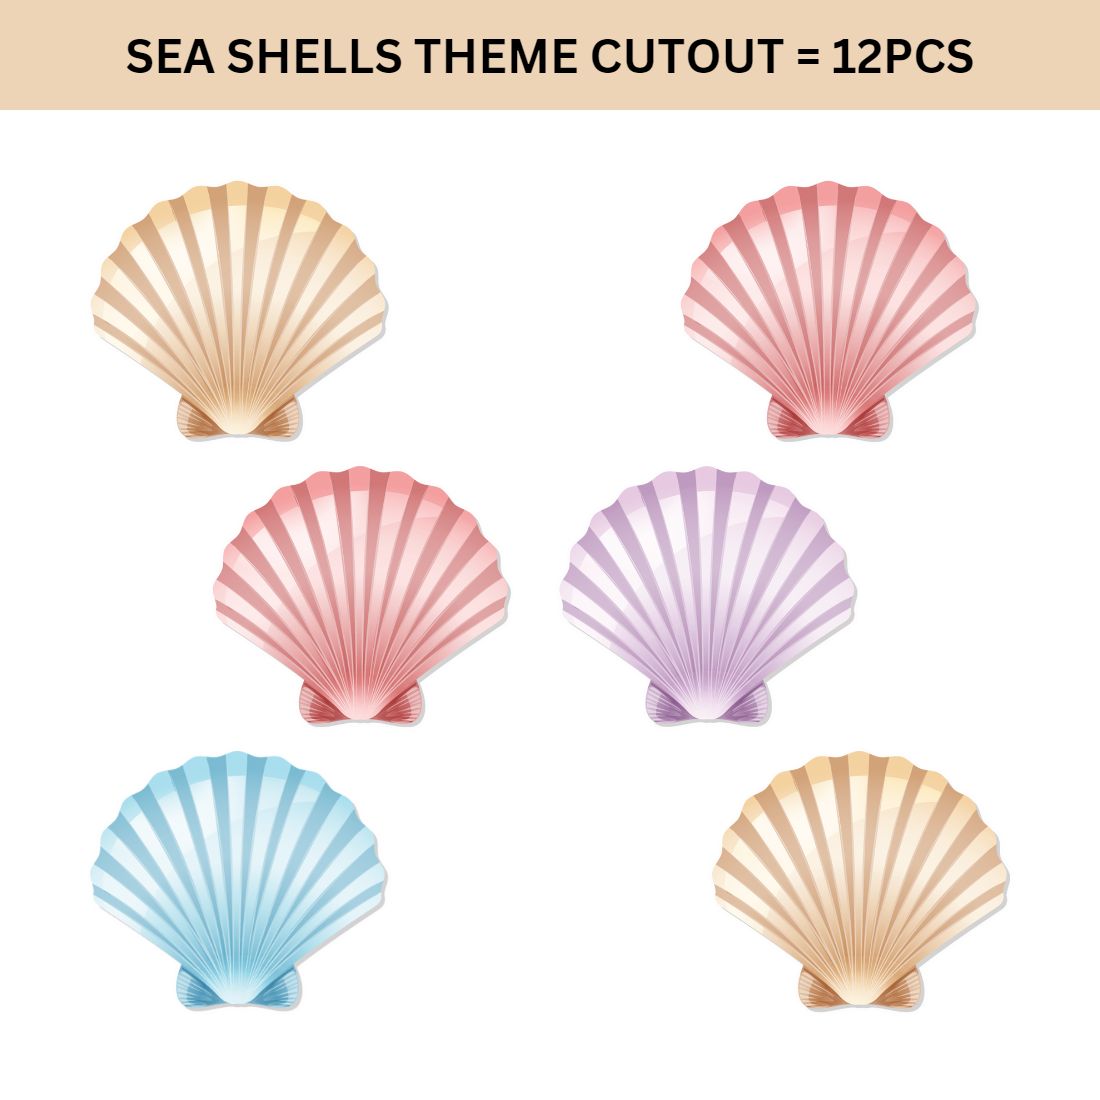 Sea Shells Theme Cutout (6 inches/250 GSM Cardstock/Pink, Purple, Brown, & Light Blue/12Pcs)